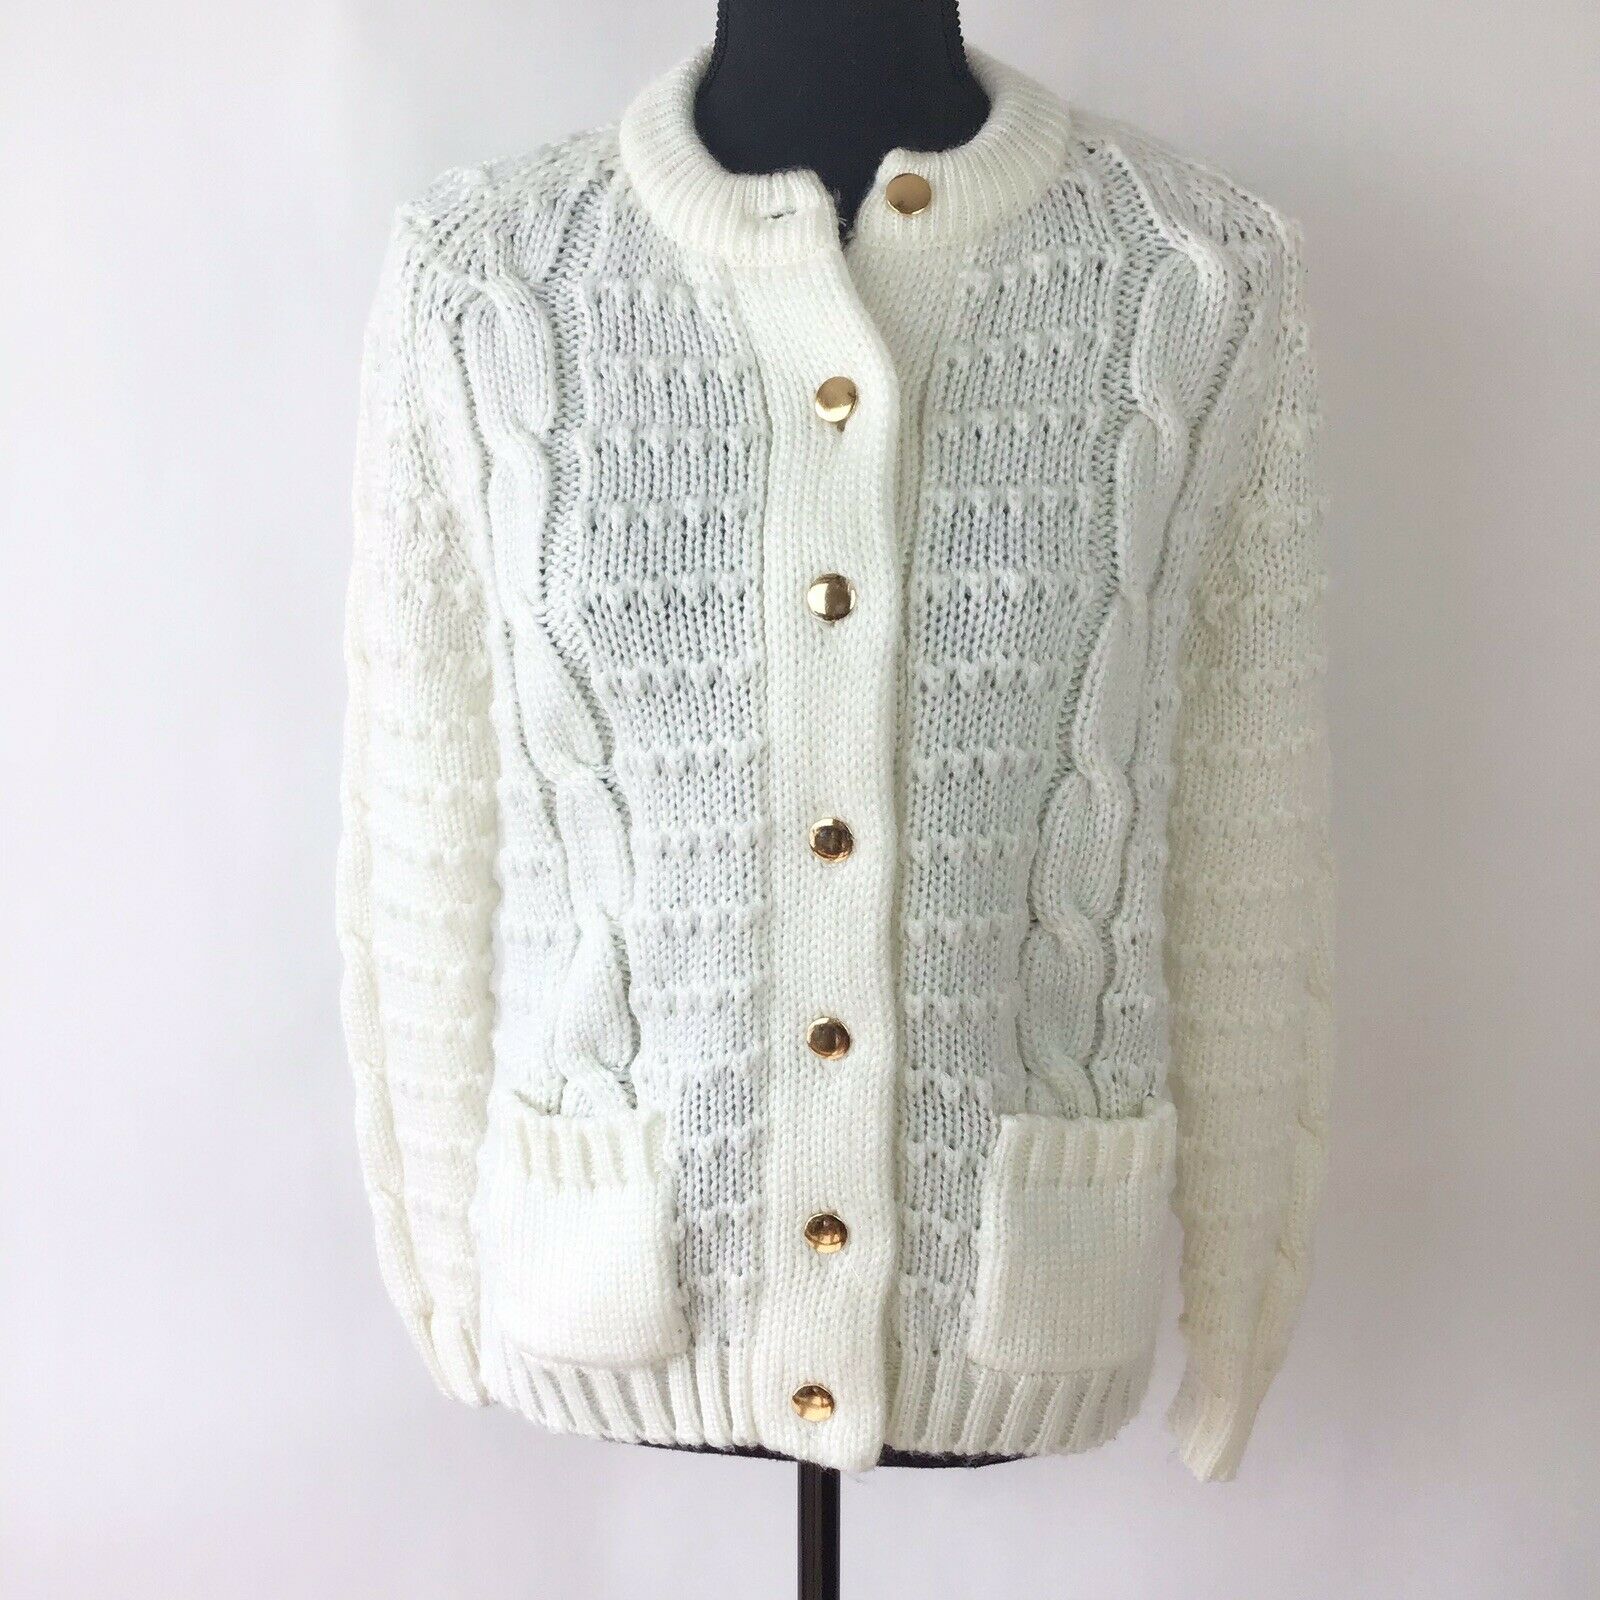 Vintage 60s 70s Womens Cable Knit Acrylic Sweater Cardigan Small Capsule Wardrob